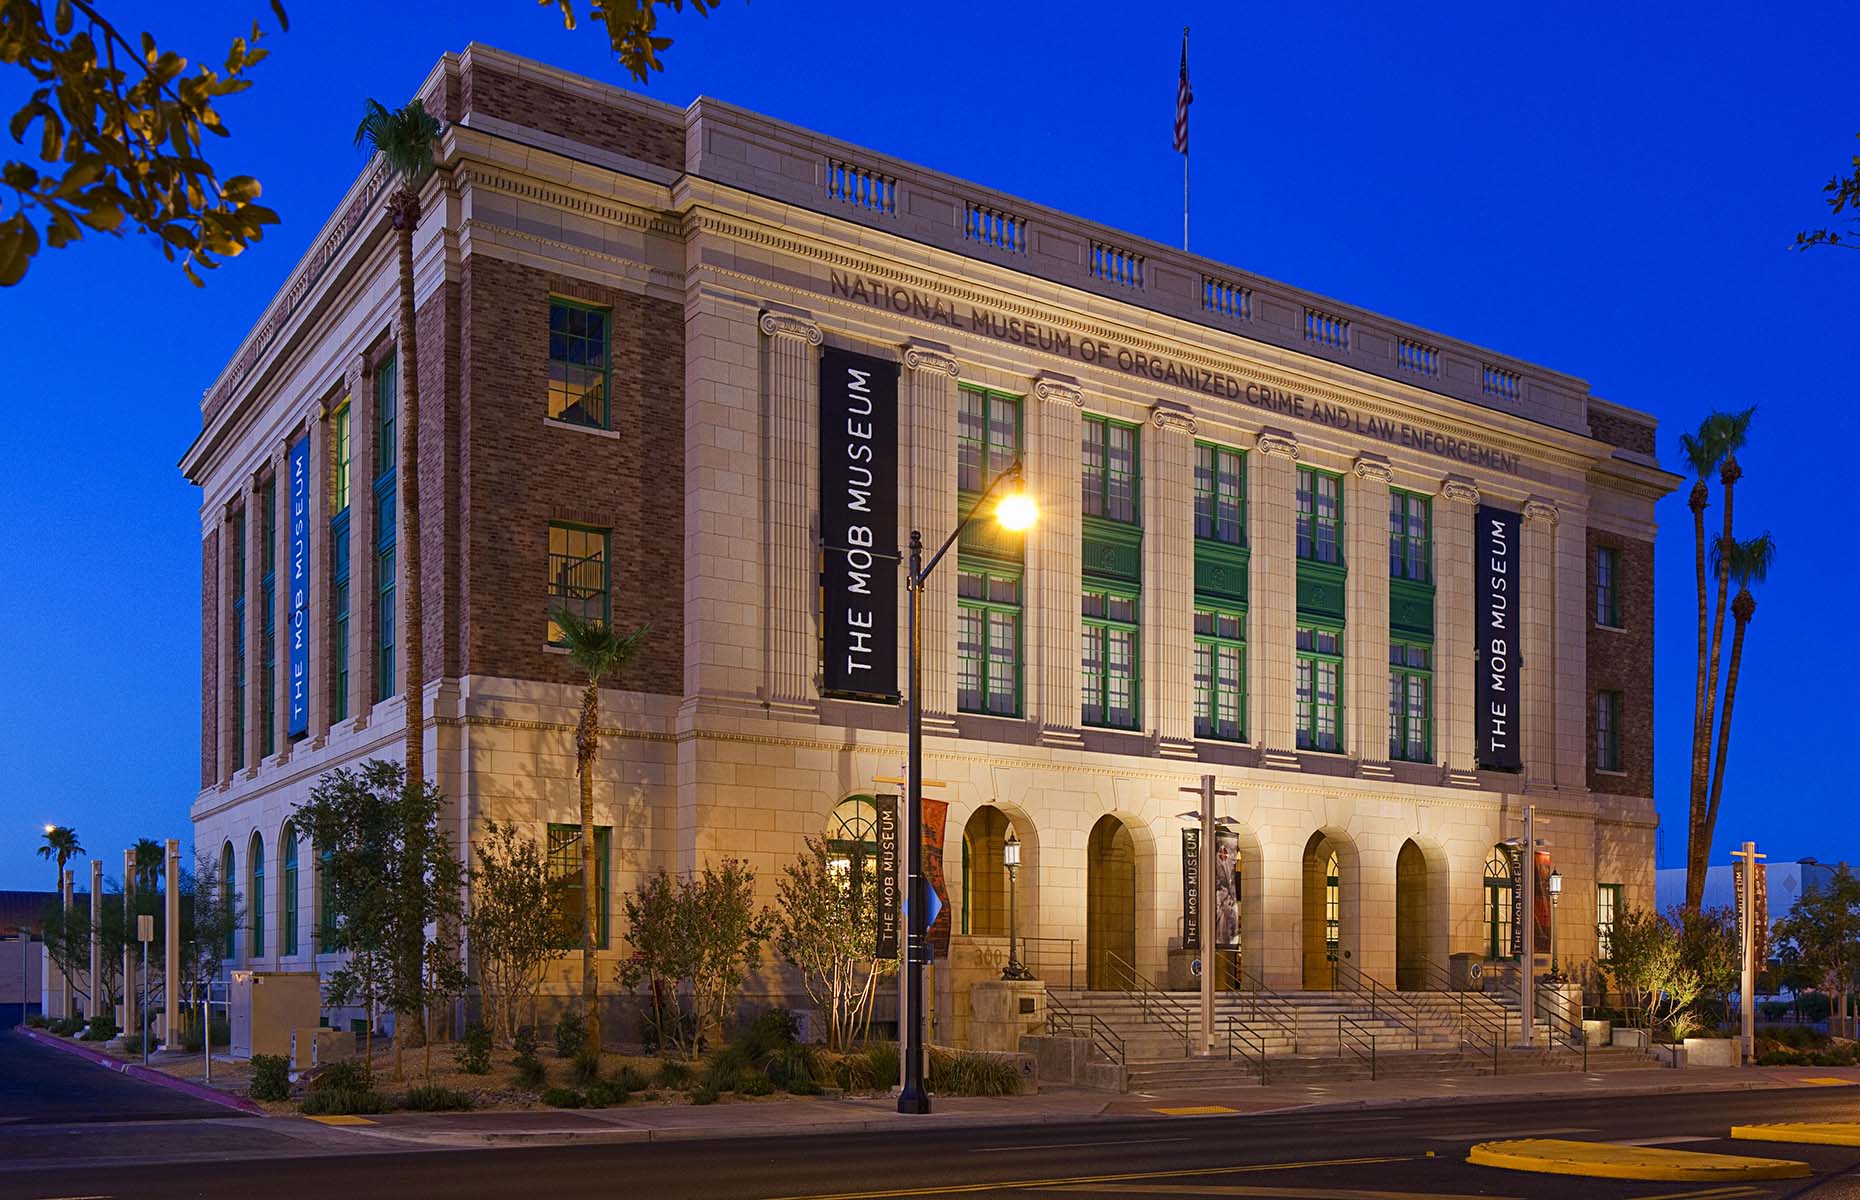 The Mob Museum in Las Vegas (Image: The Vox Agency)